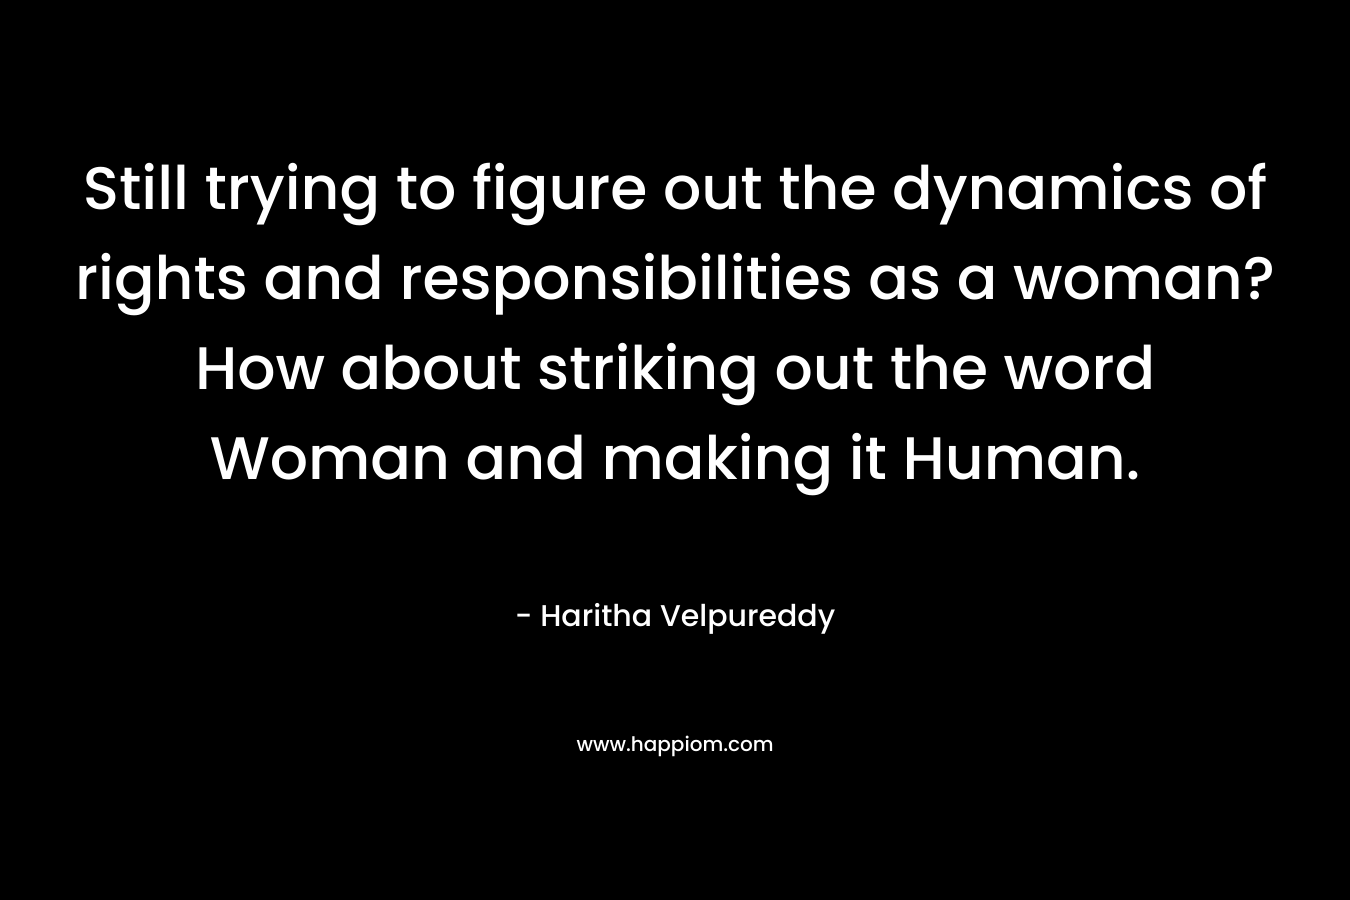 Still trying to figure out the dynamics of rights and responsibilities as a woman? How about striking out the word Woman and making it Human. – Haritha Velpureddy